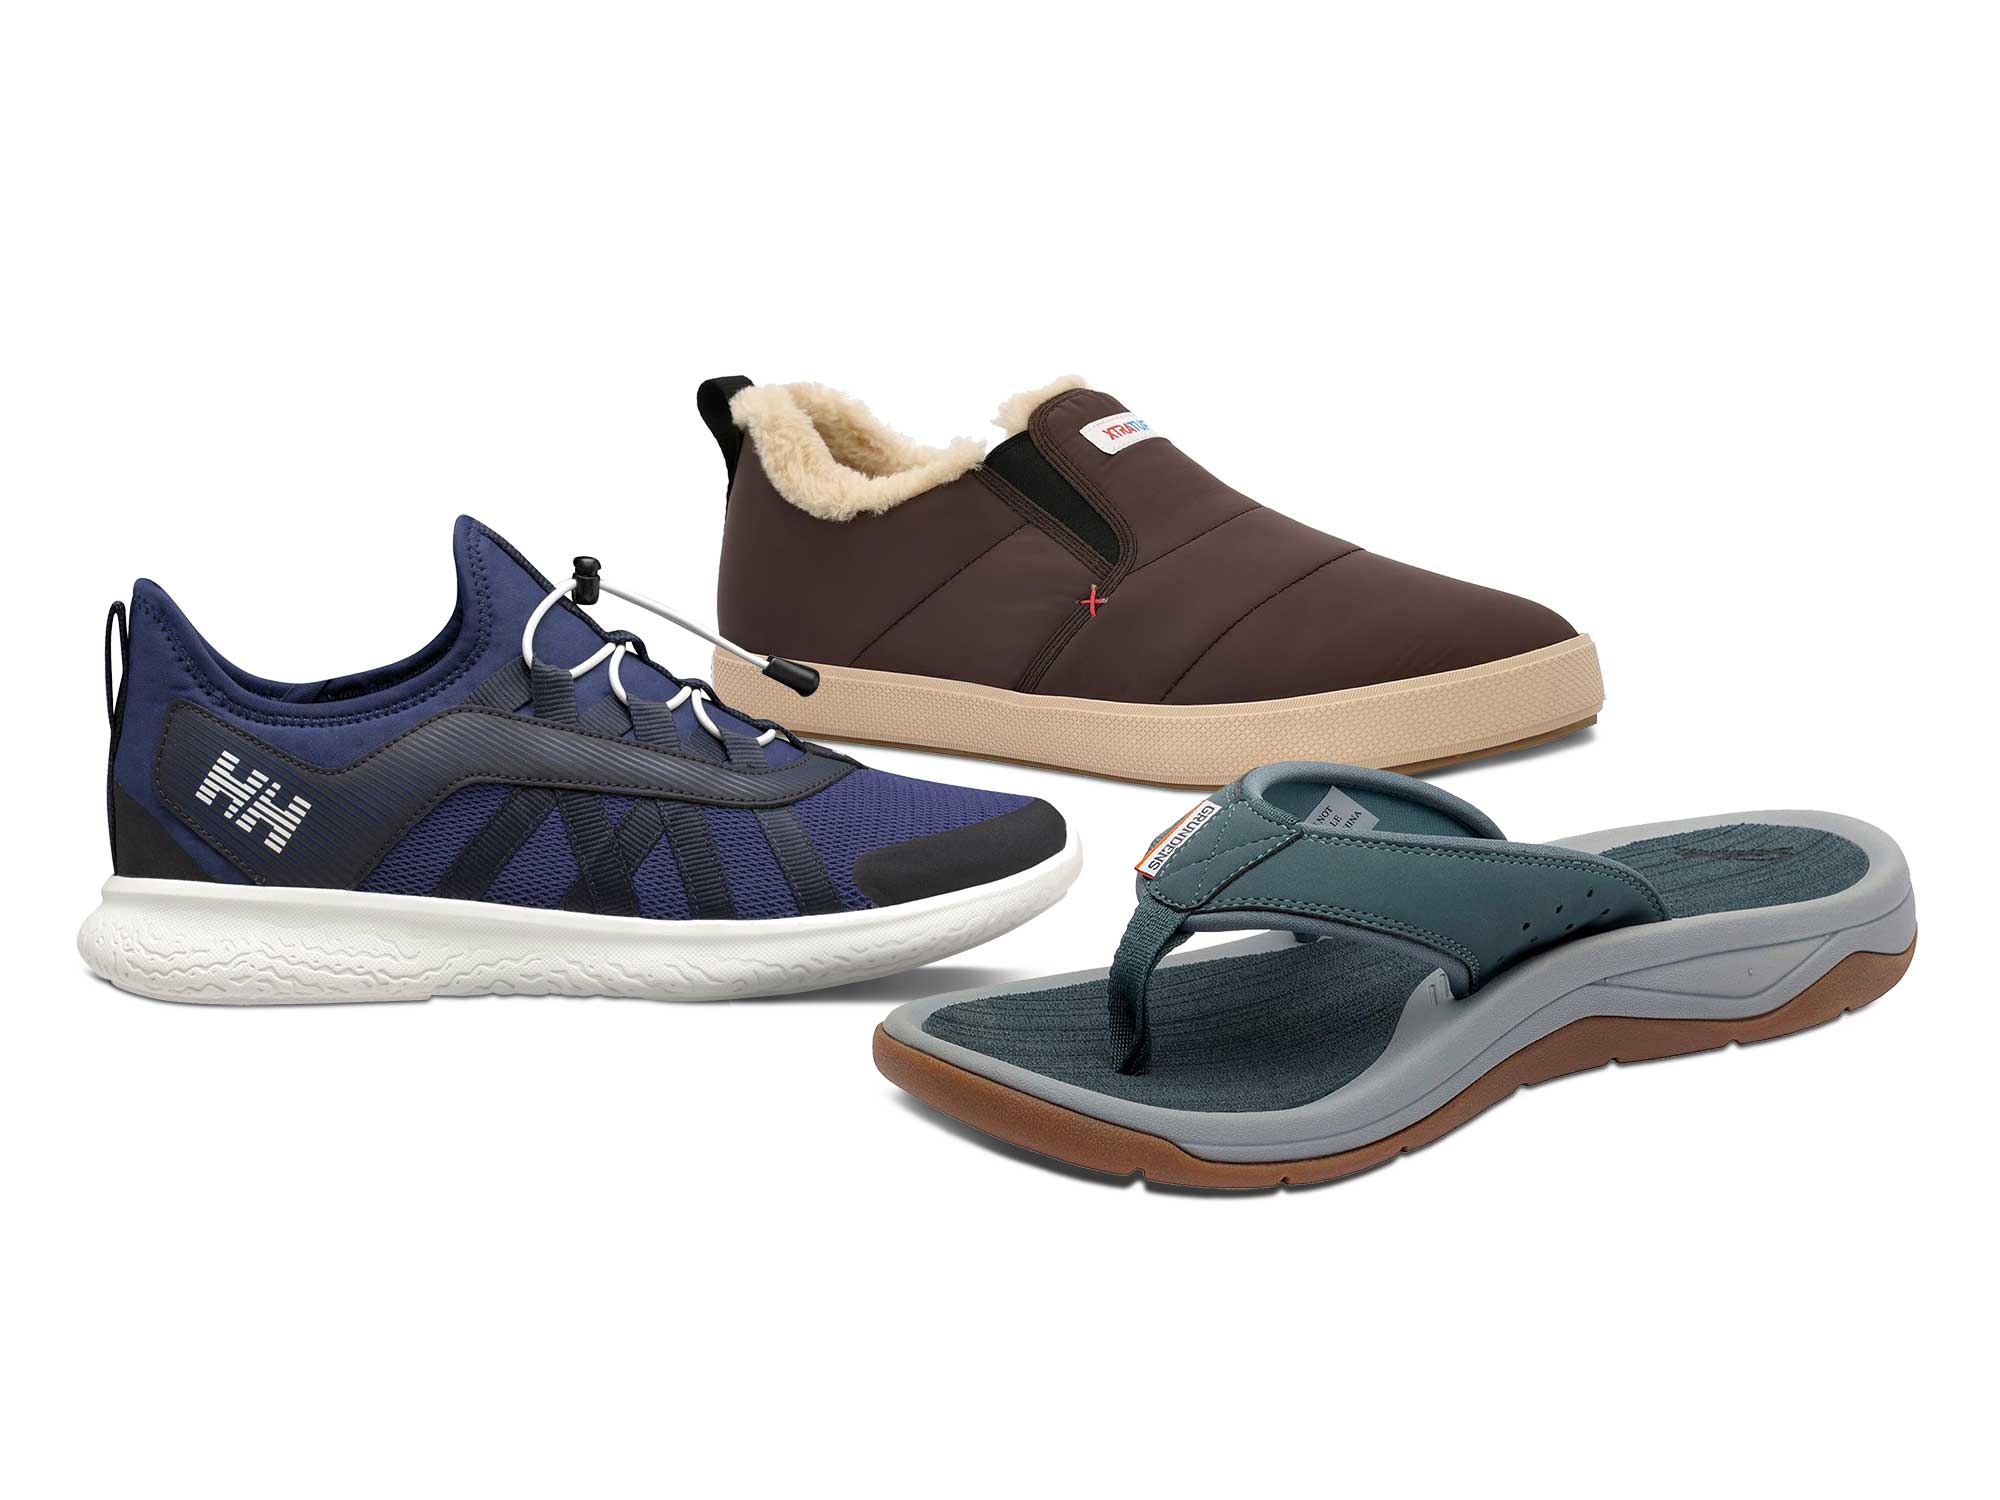 Boating Shoes for Spring and Summer